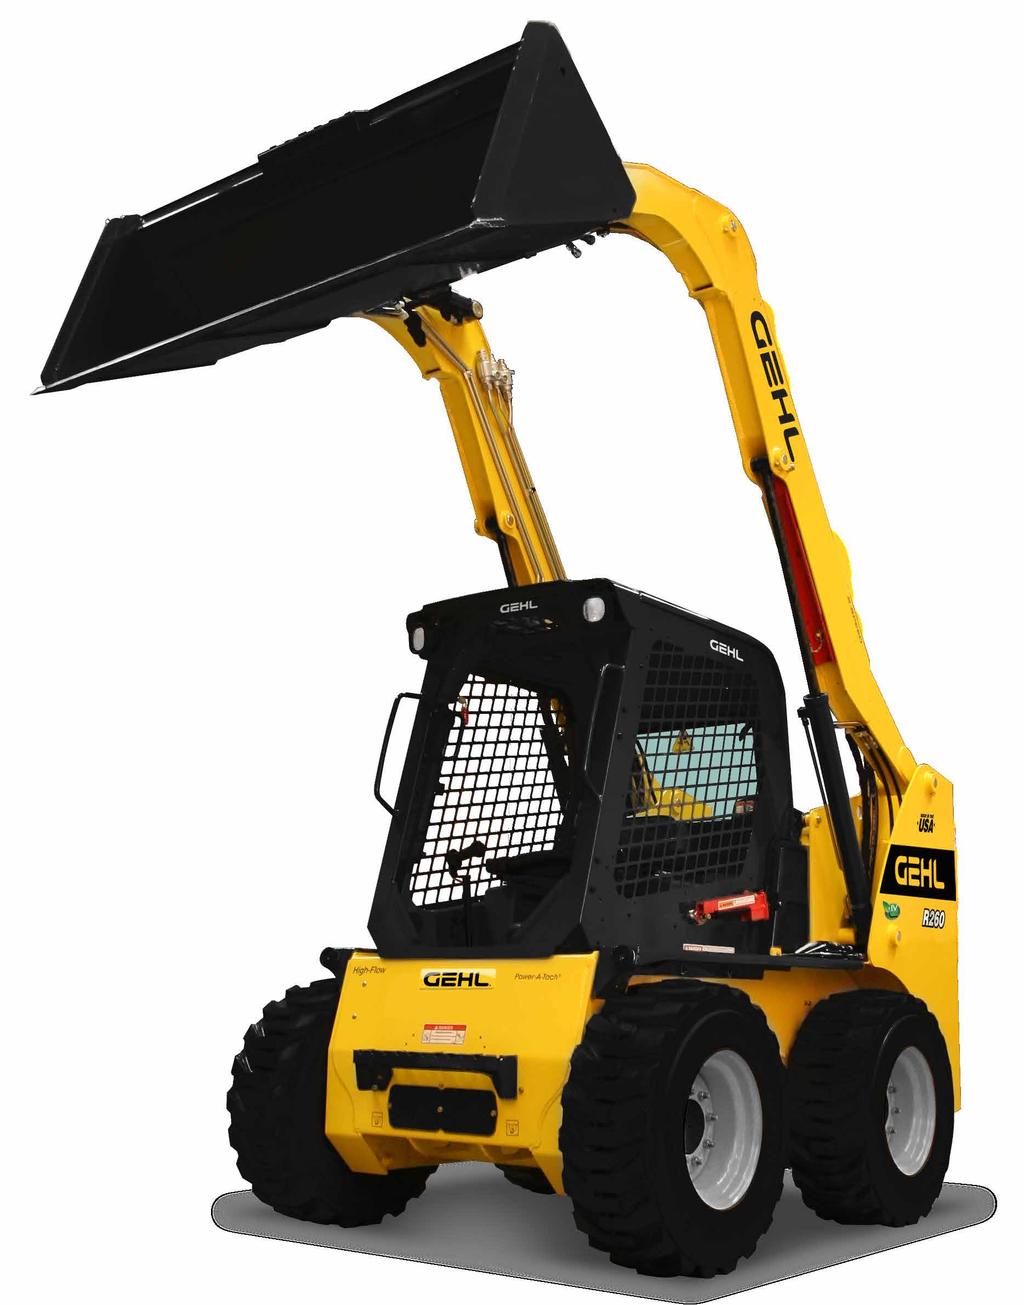 POWER and PERFORMANCE FULL POWER ON DEMAND The largest most powerful radial skid loaders offered by Gehl.